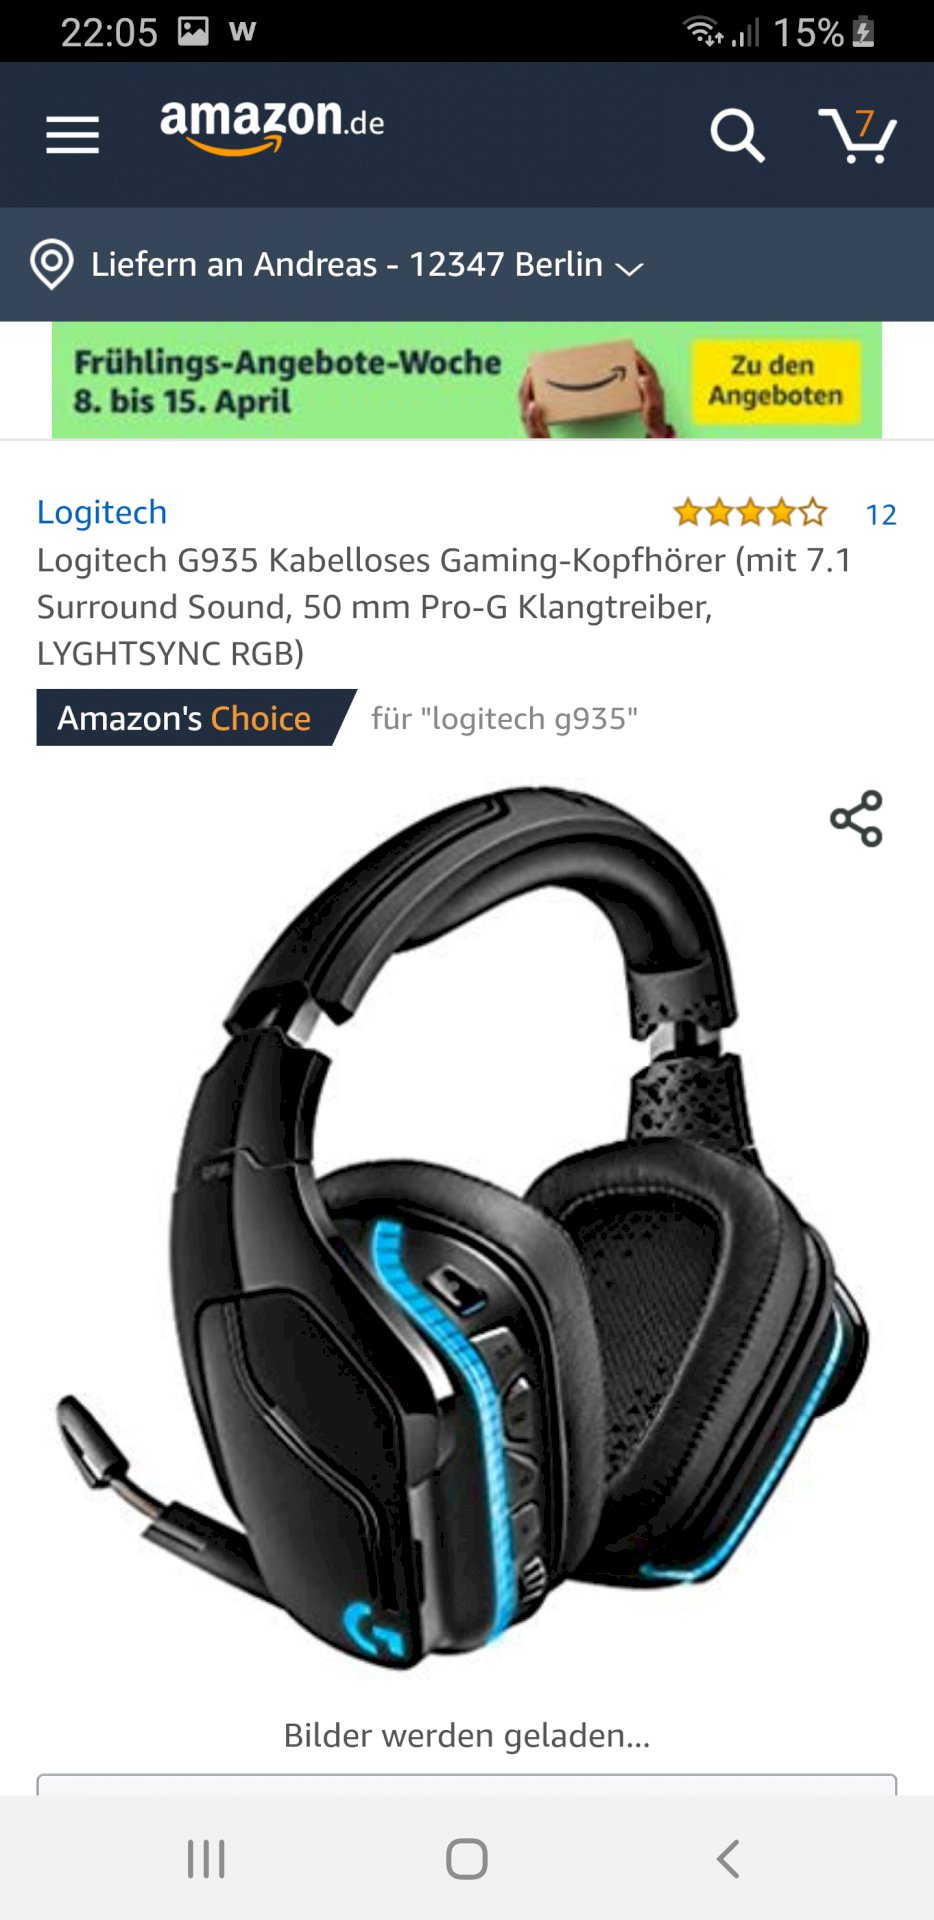 Ps4 Gaming Headset Turtle Beach, Steelseries or Logitech - 1